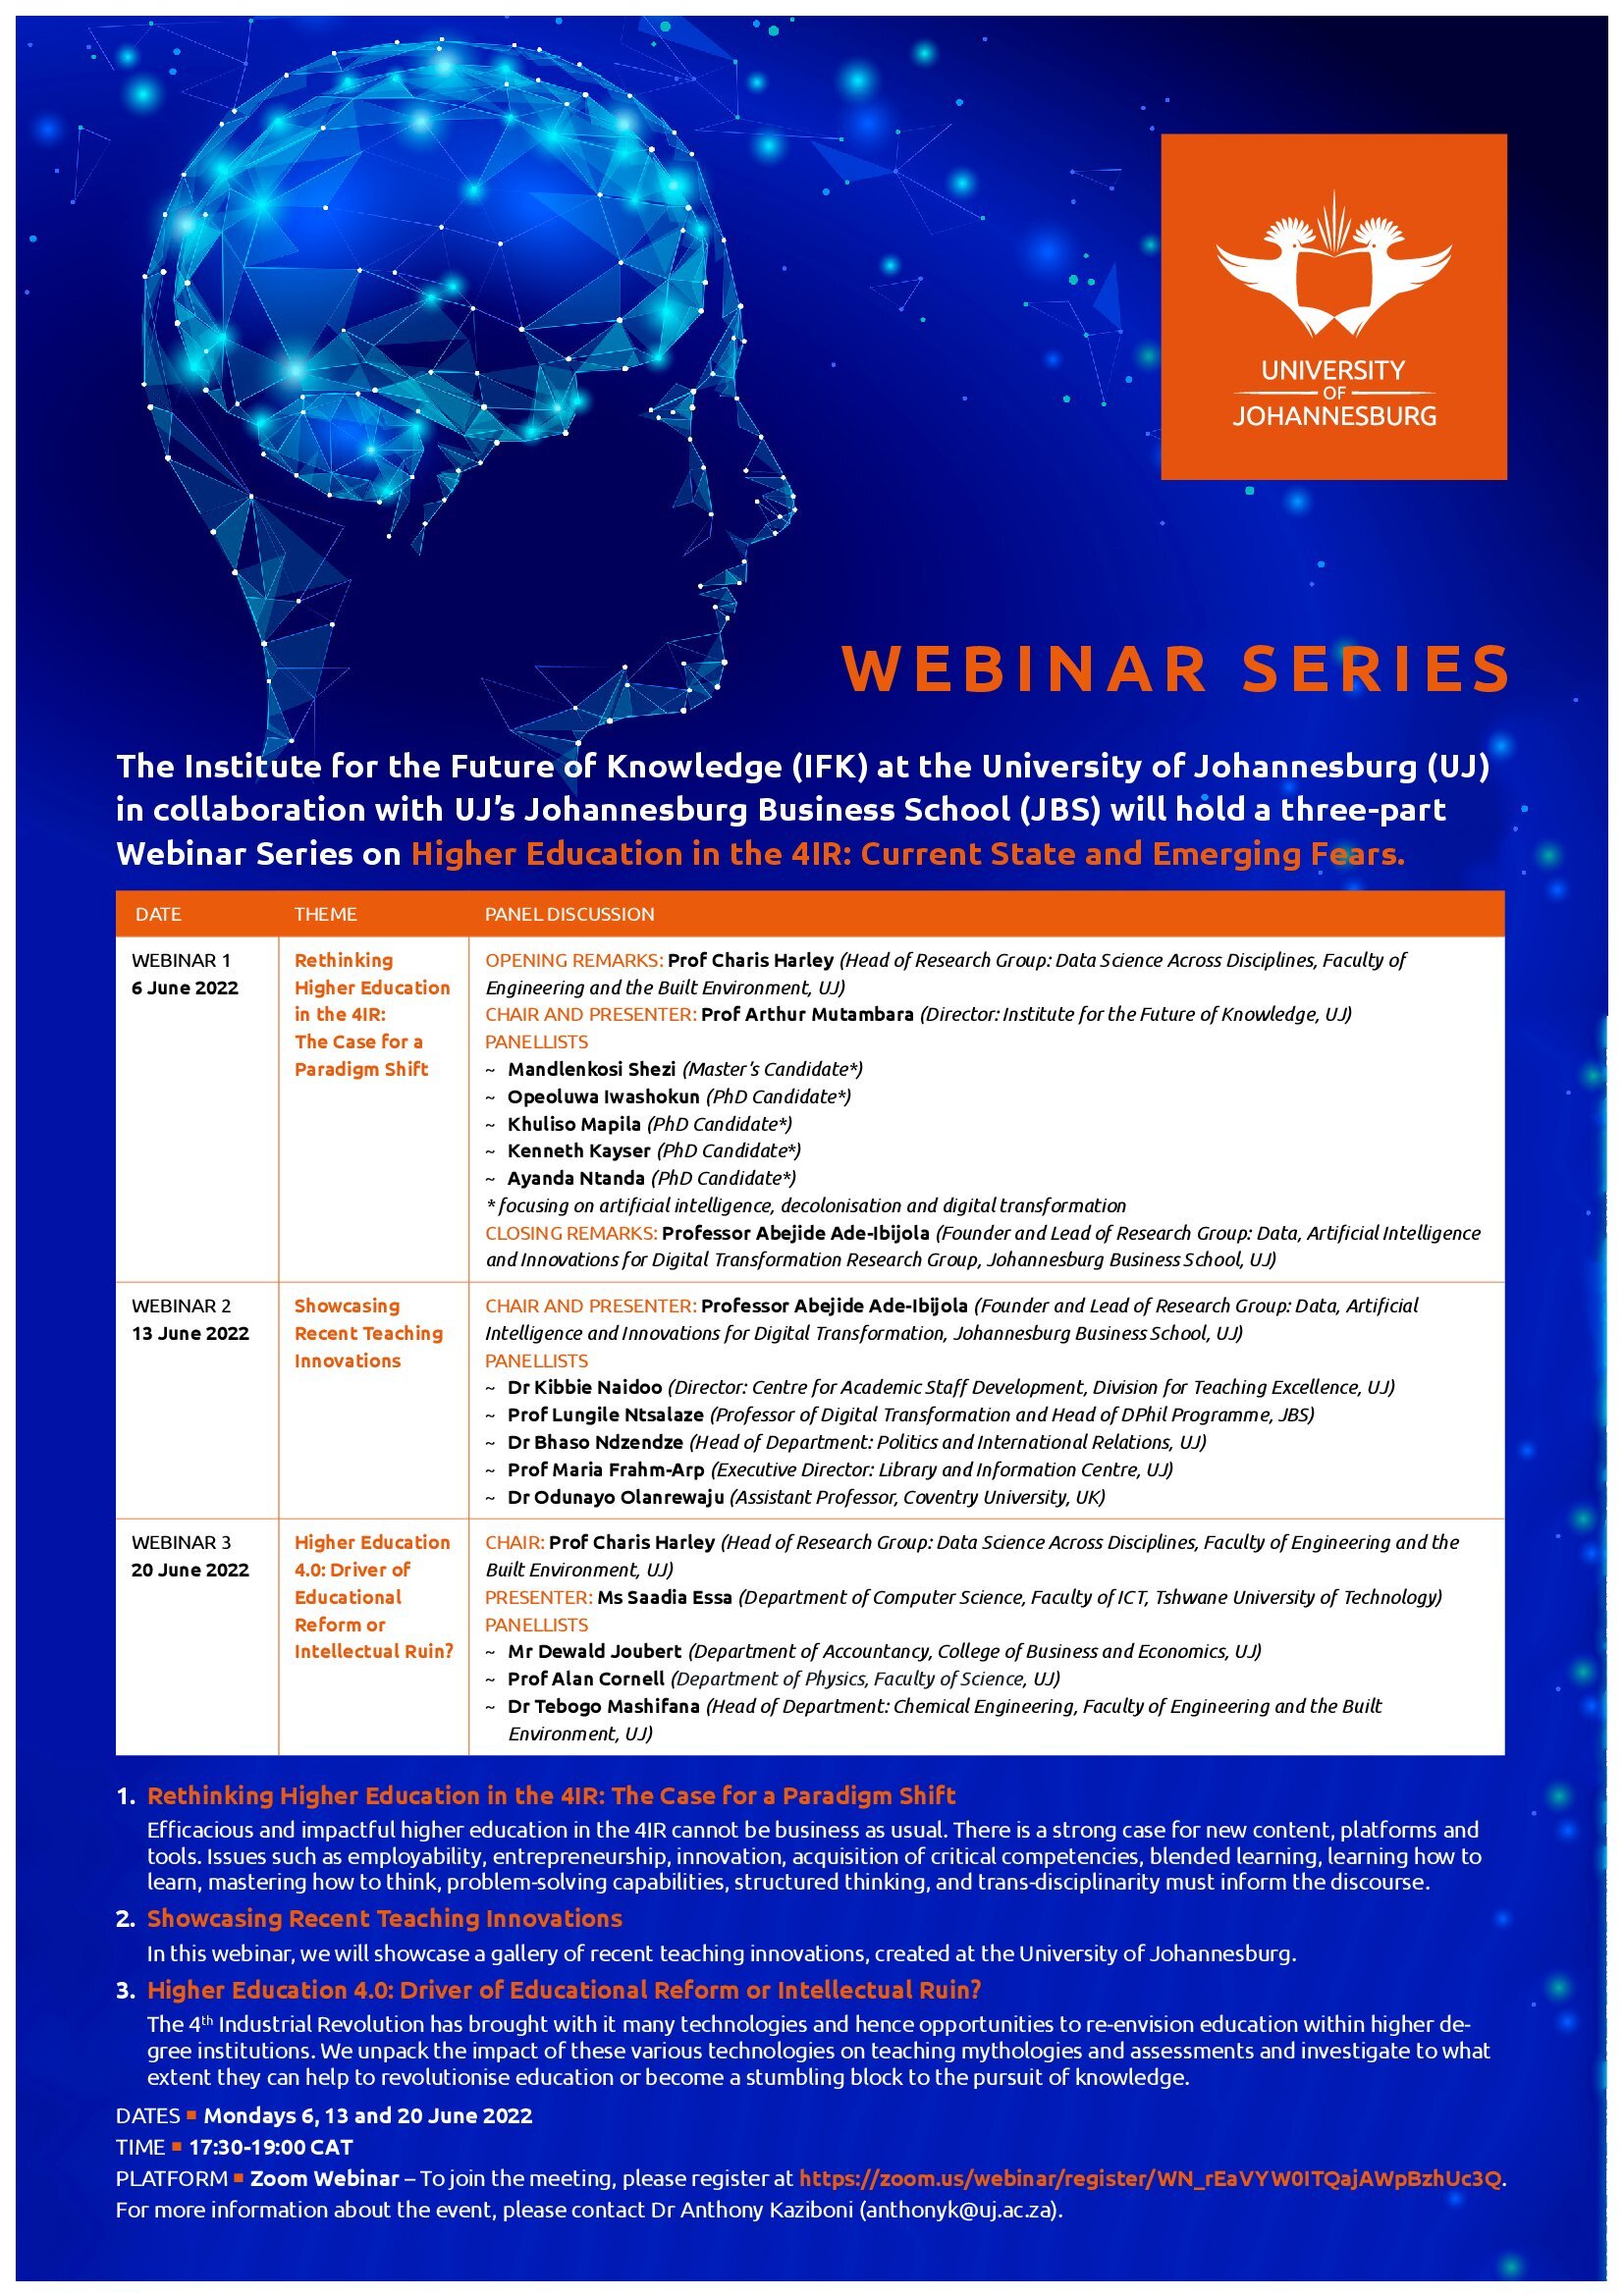 Webinar Series on Higher Education in the 4IR: Current State and Emerging Fears